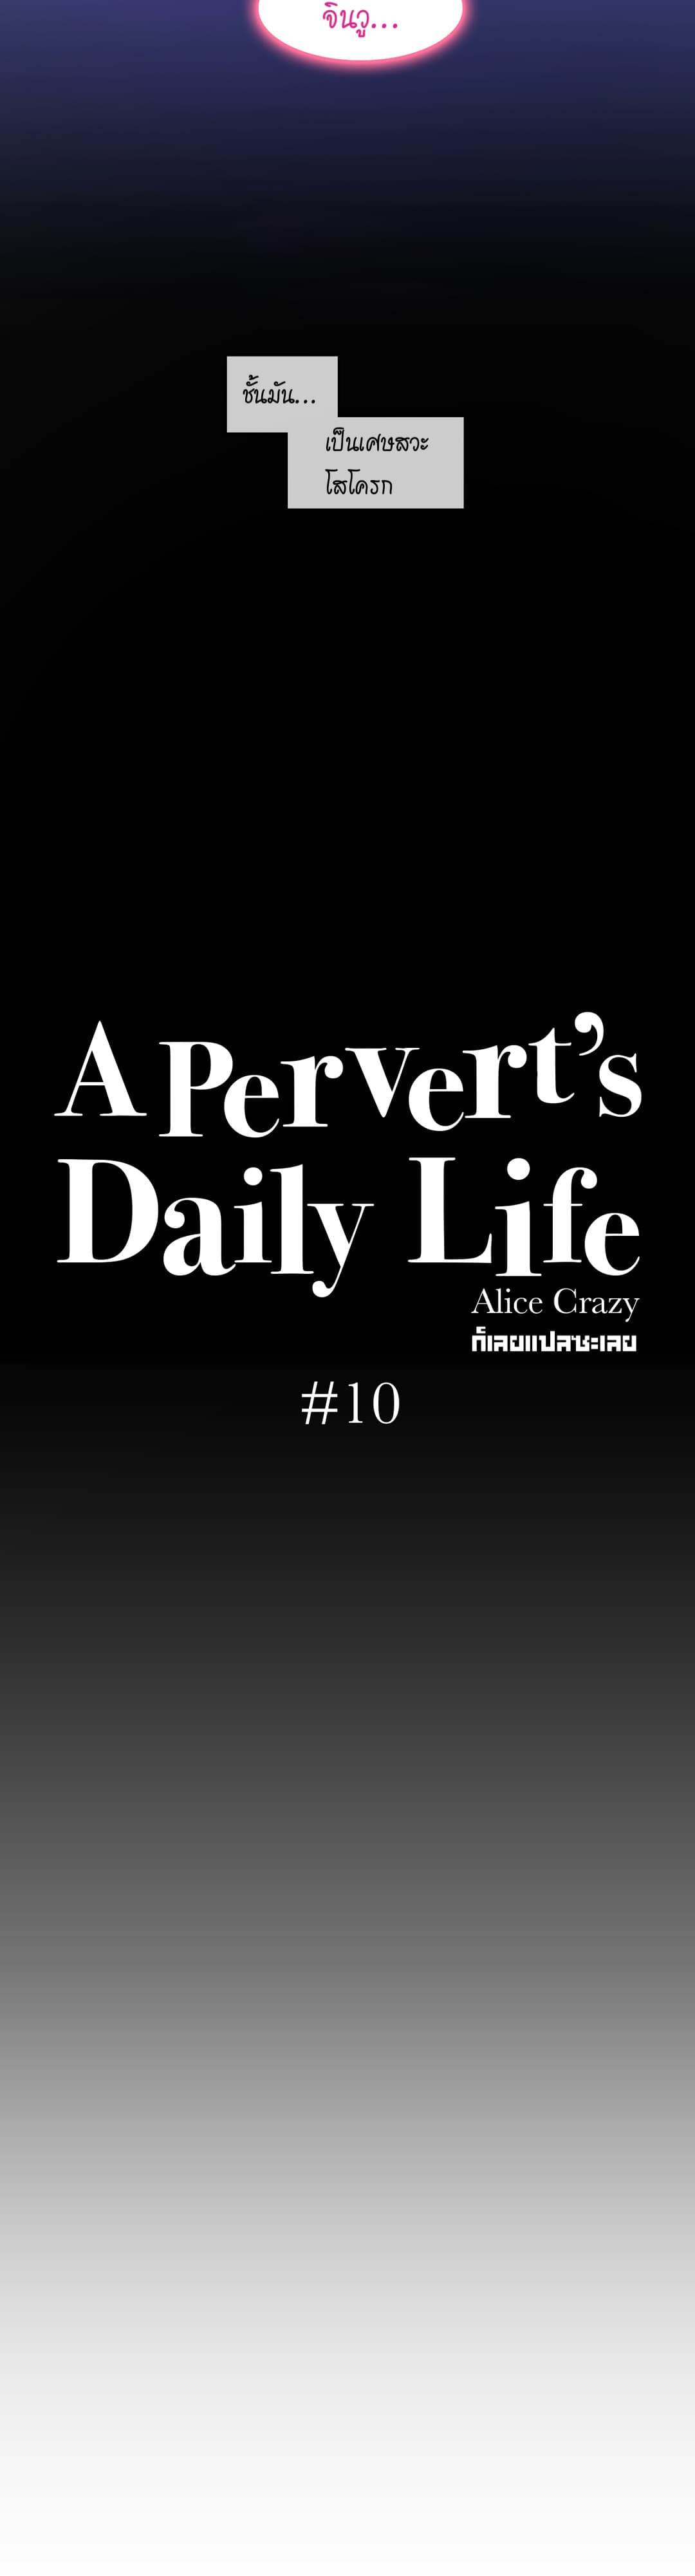 A Pervert’s Daily Life 10 (6)